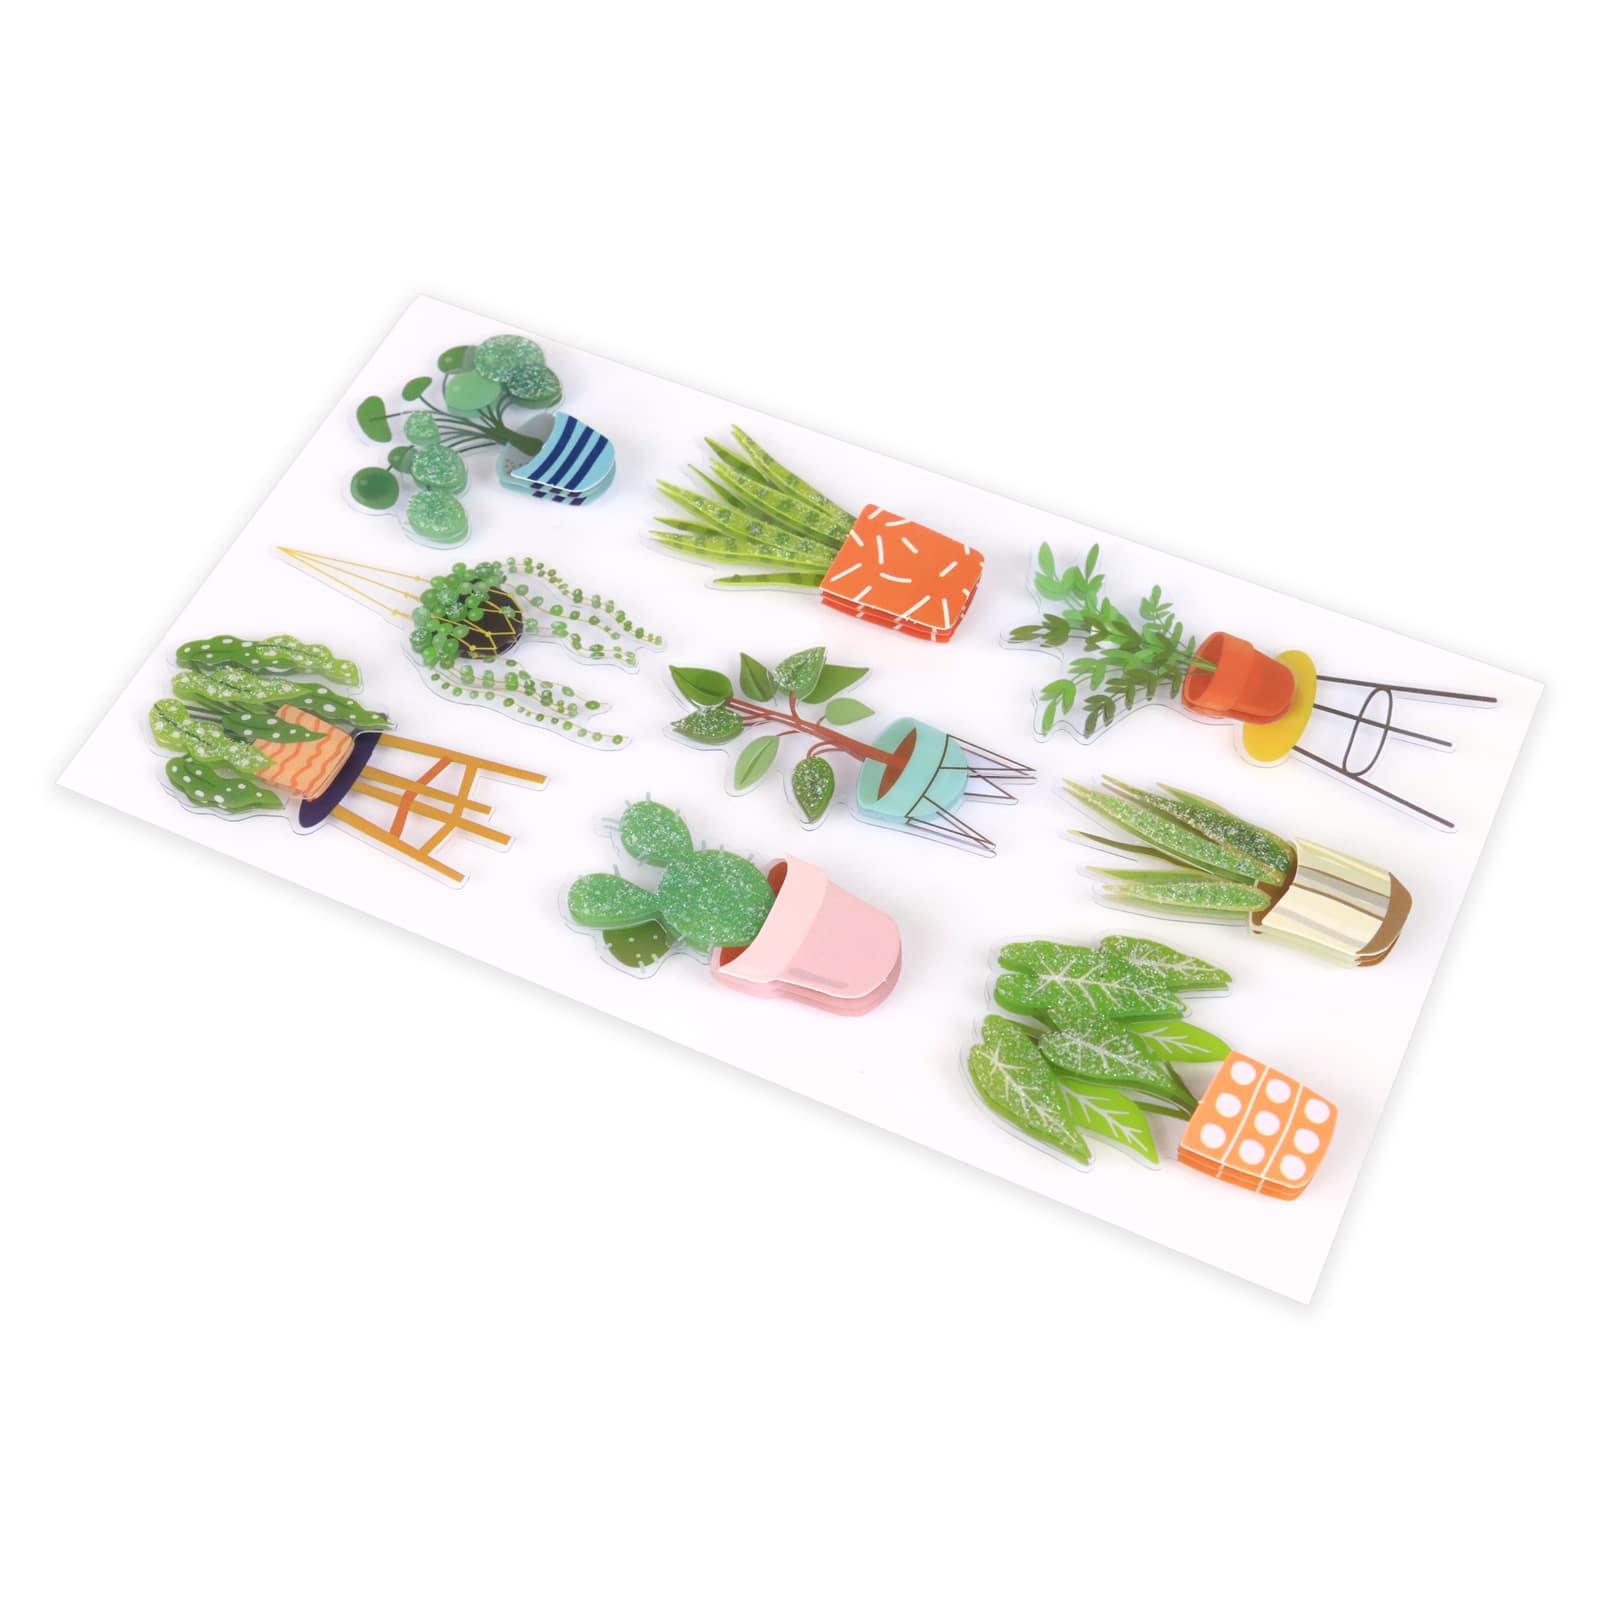 House Plant Stickers by Recollections&#x2122;